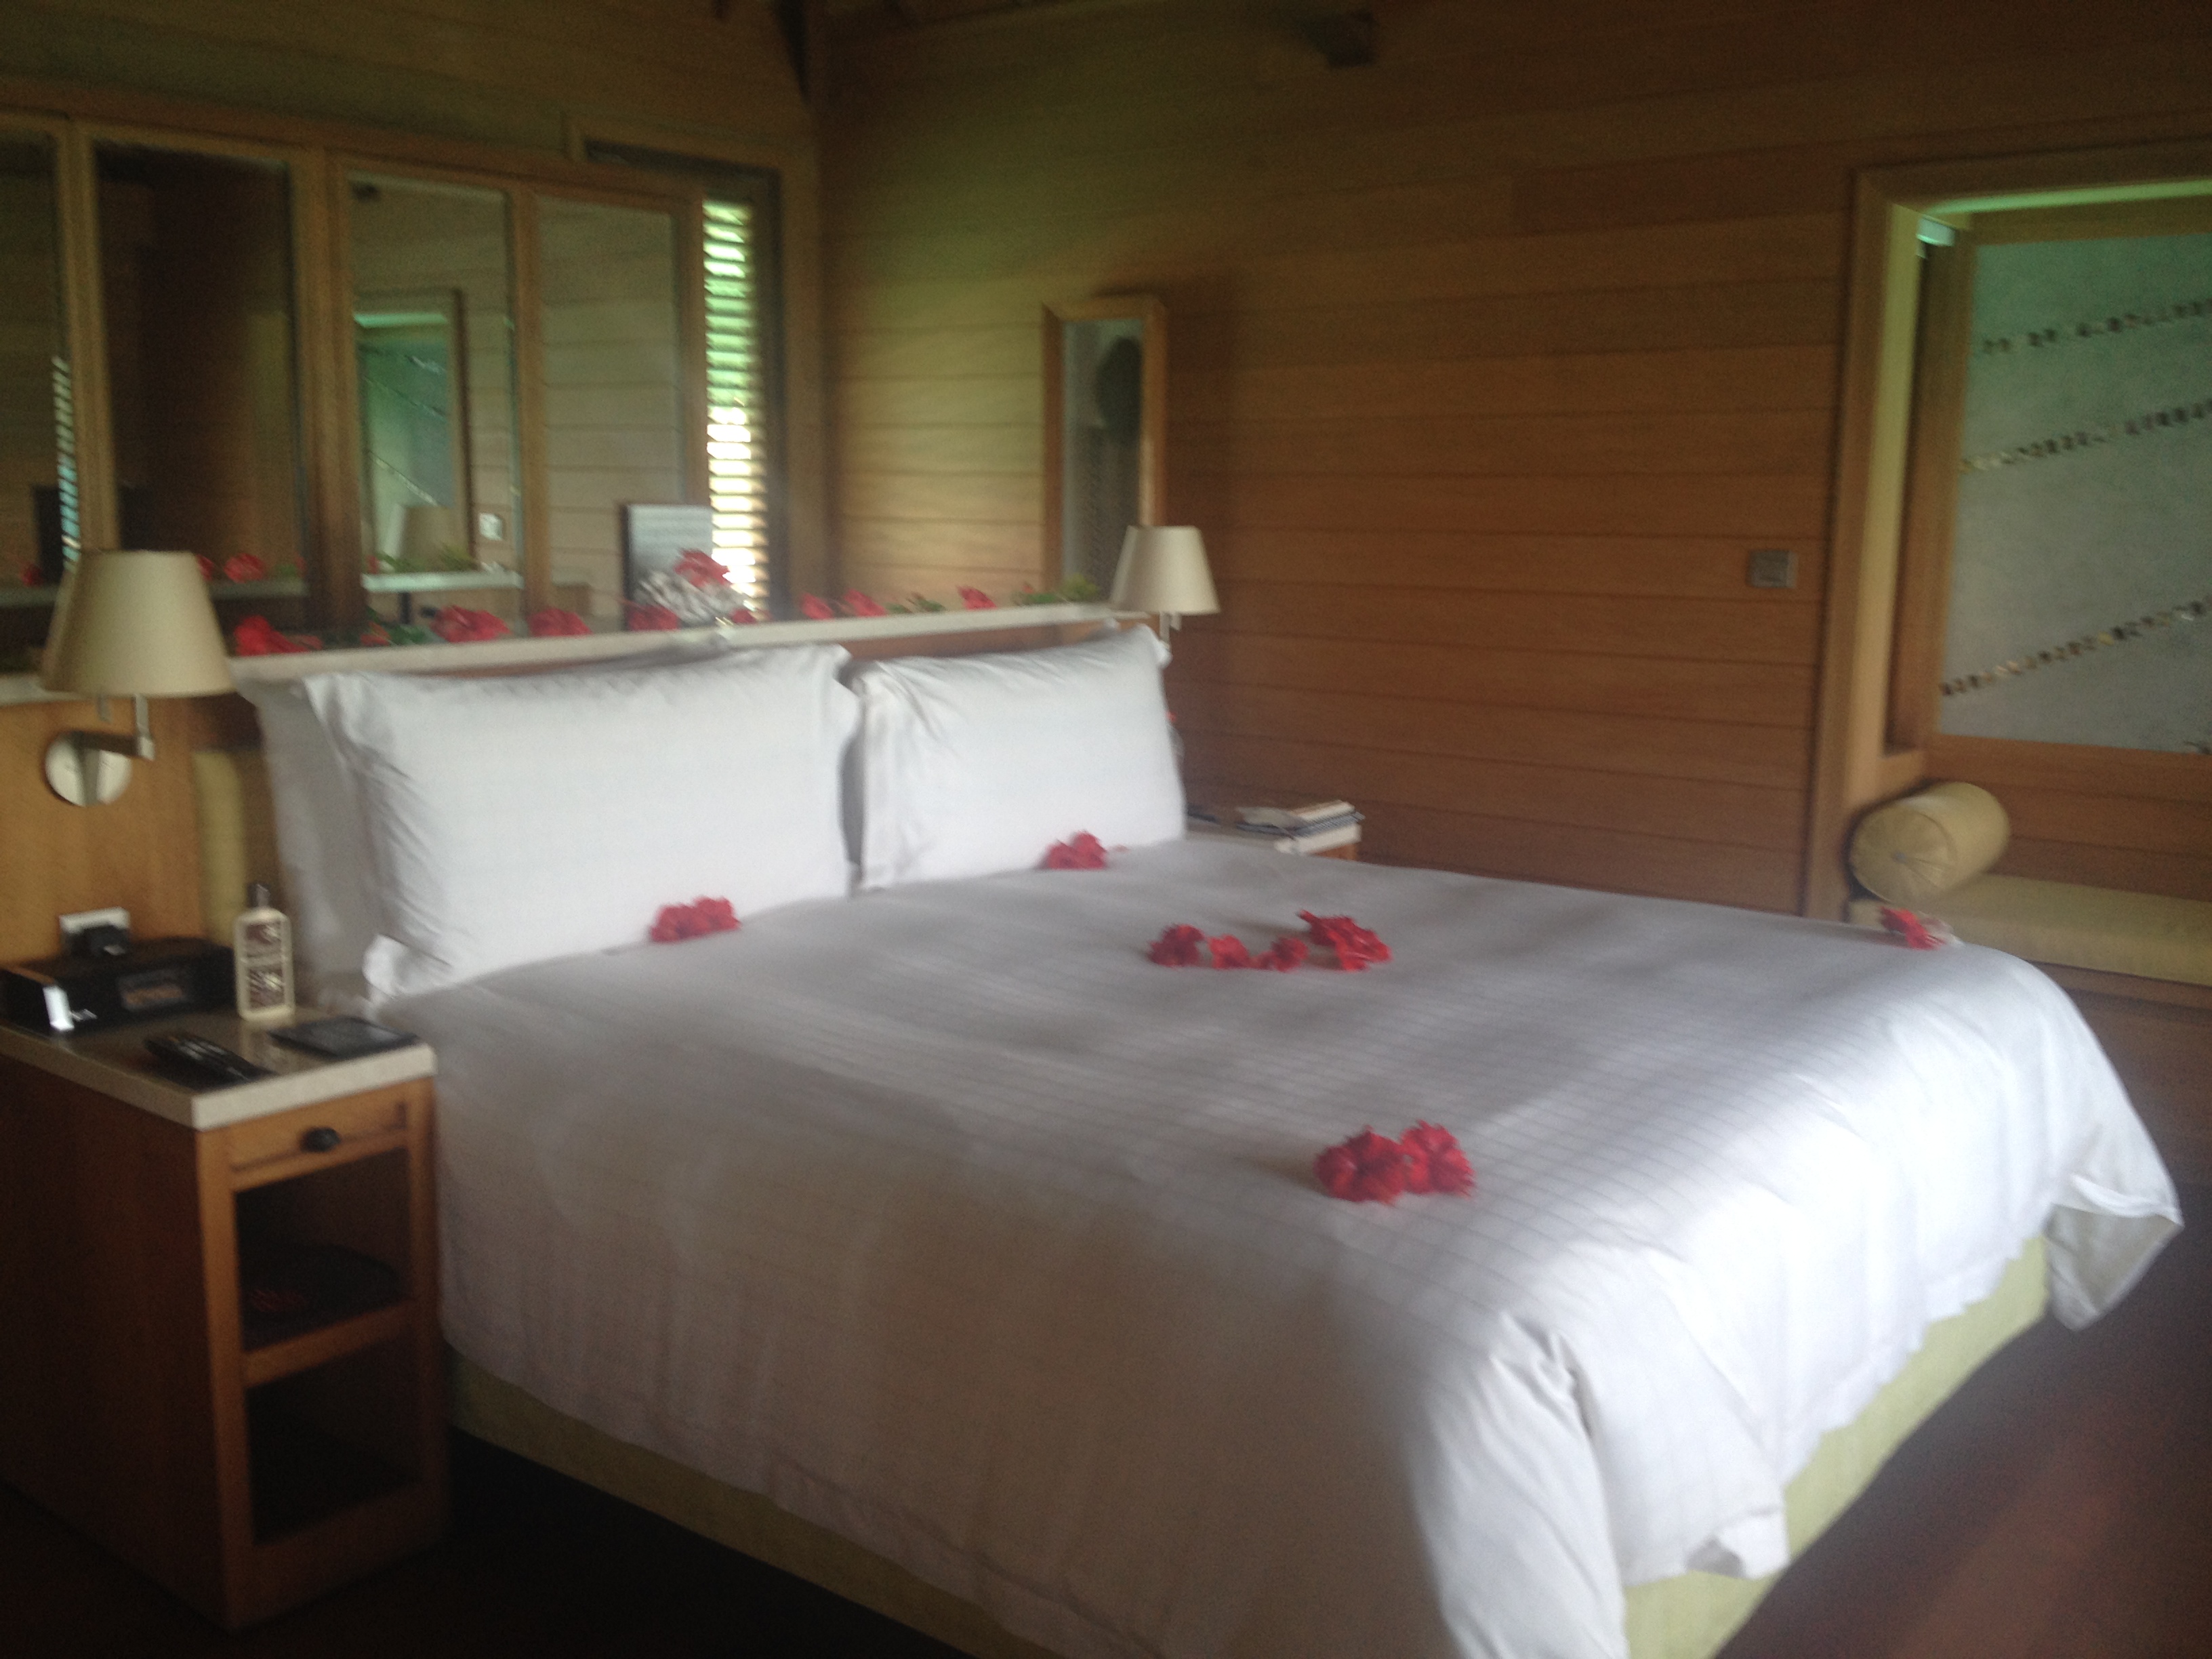 Bed at resort with red flowers